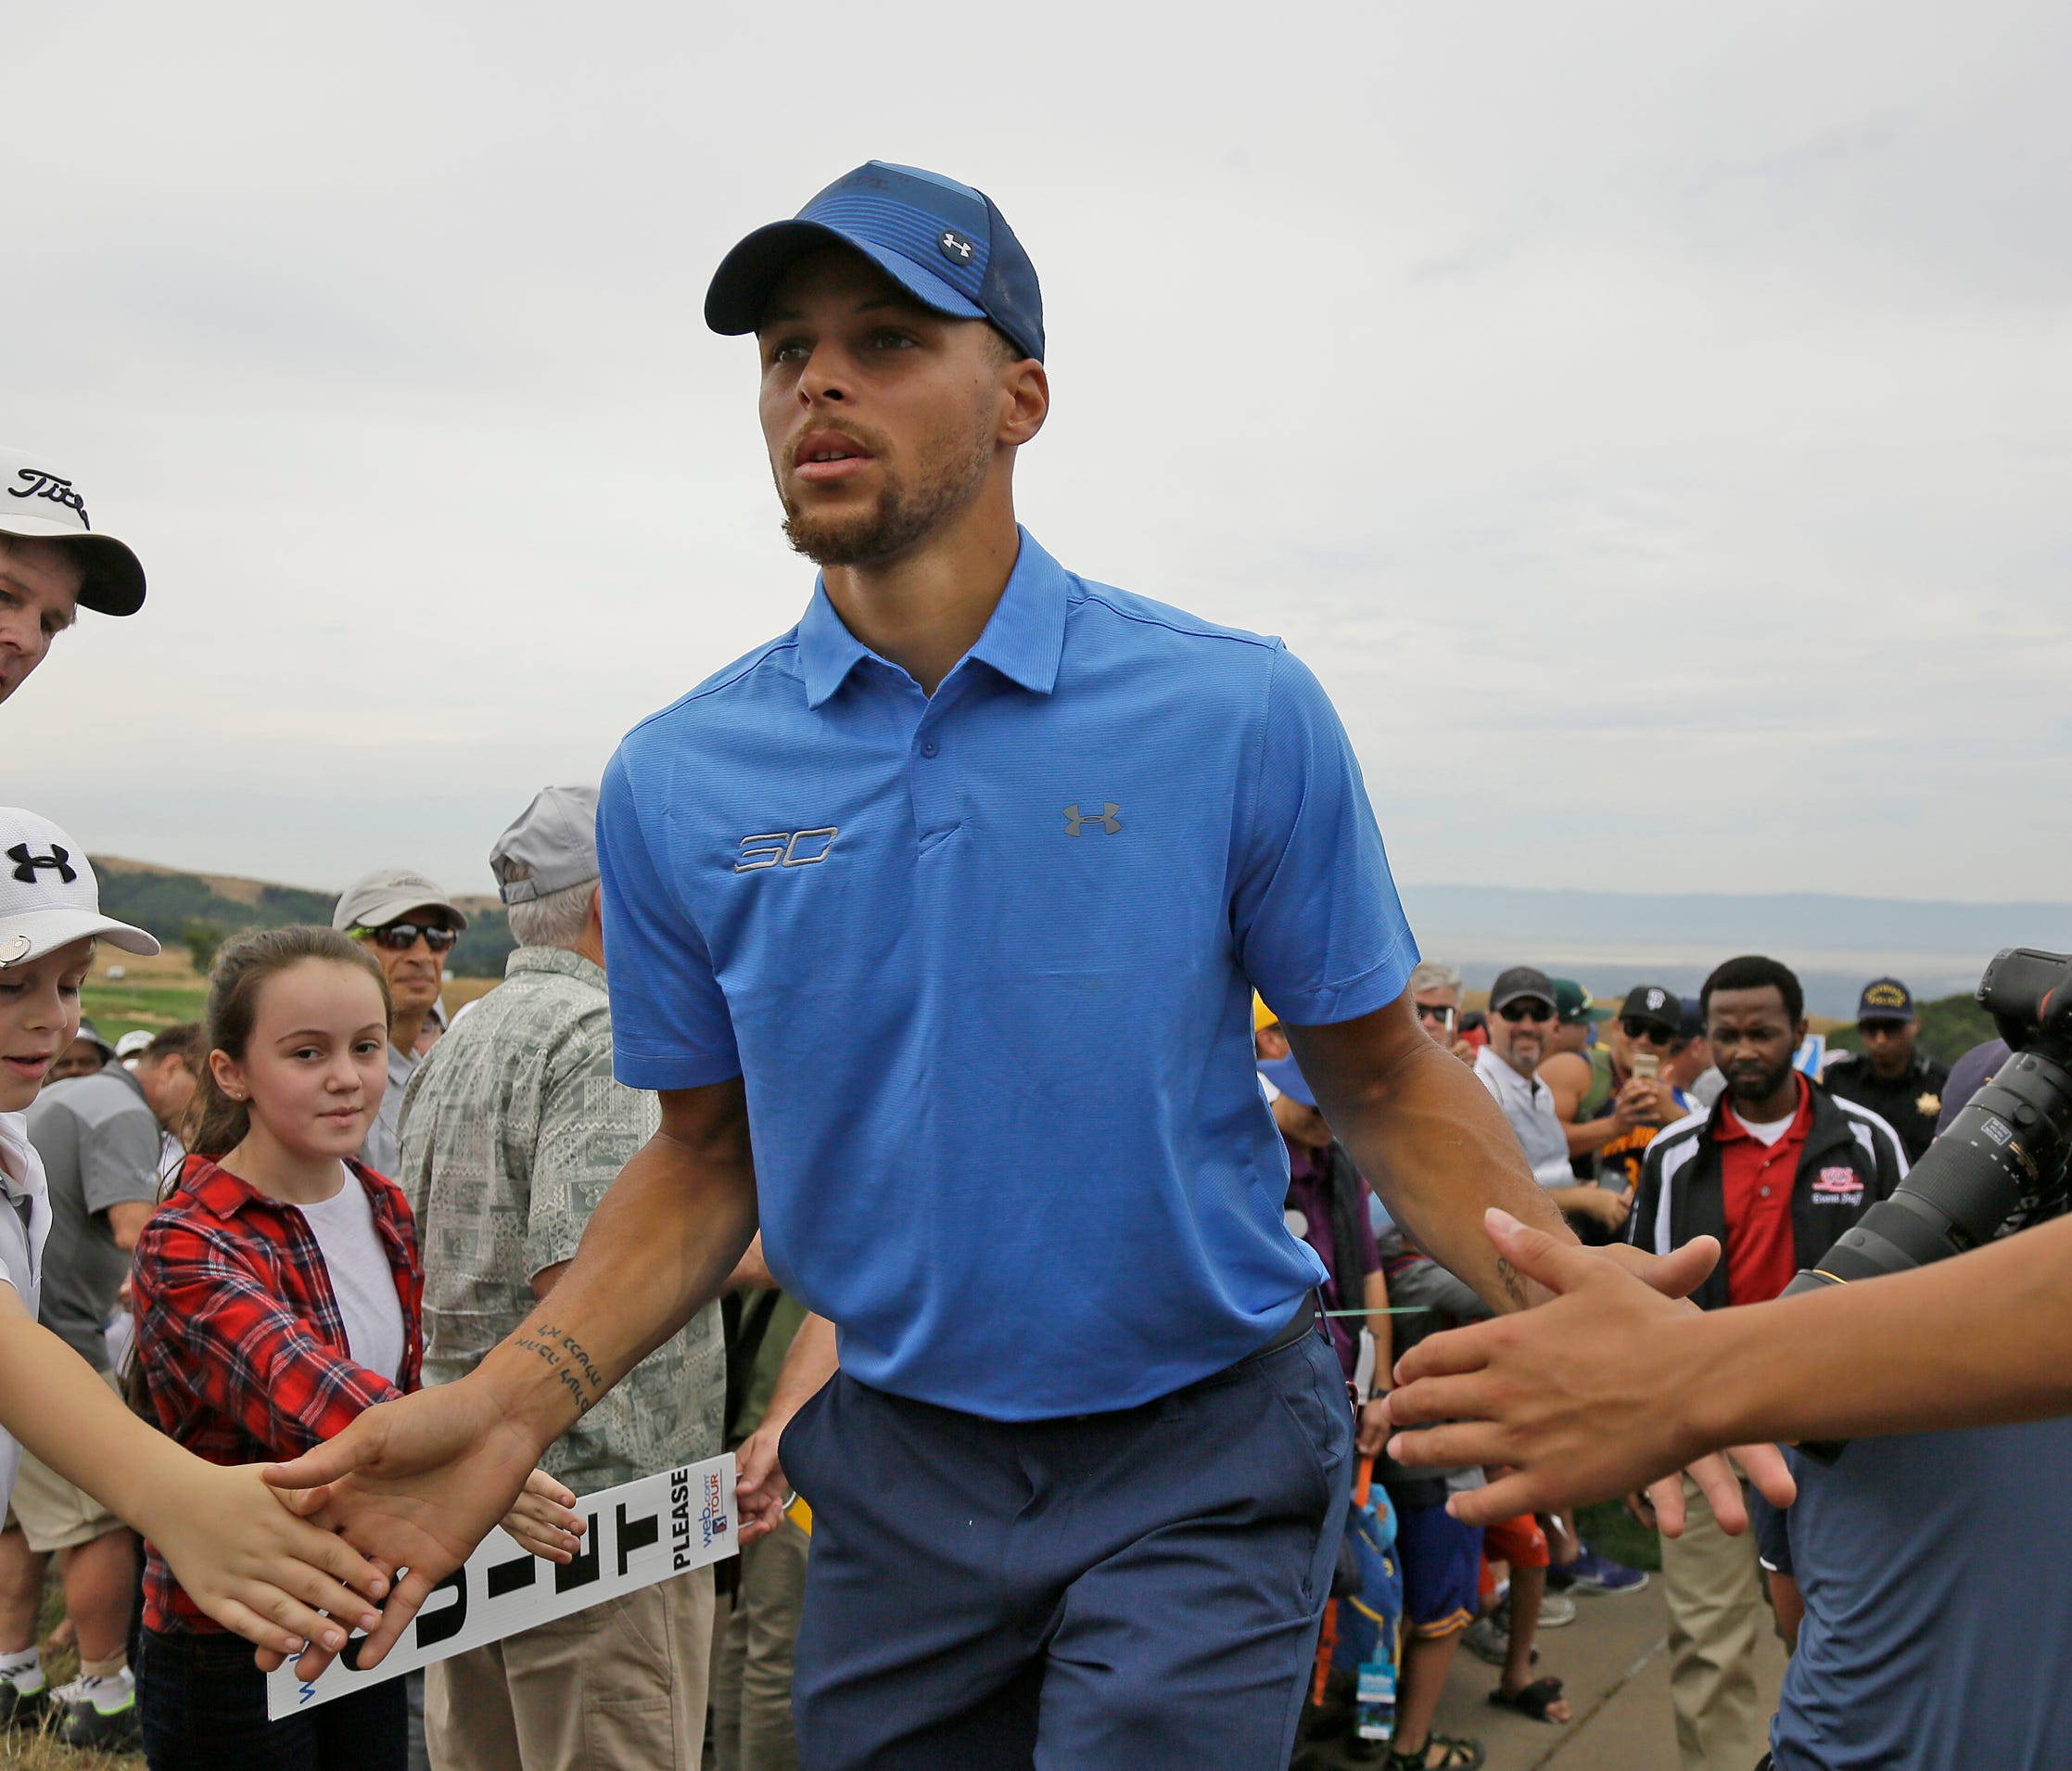 Golden State Warriors NBA basketball player Stephen Curry makes his way past the gallery to the 18th tee during the Web.com Tour's Ellie Mae Classic golf tournament  on Thursday.